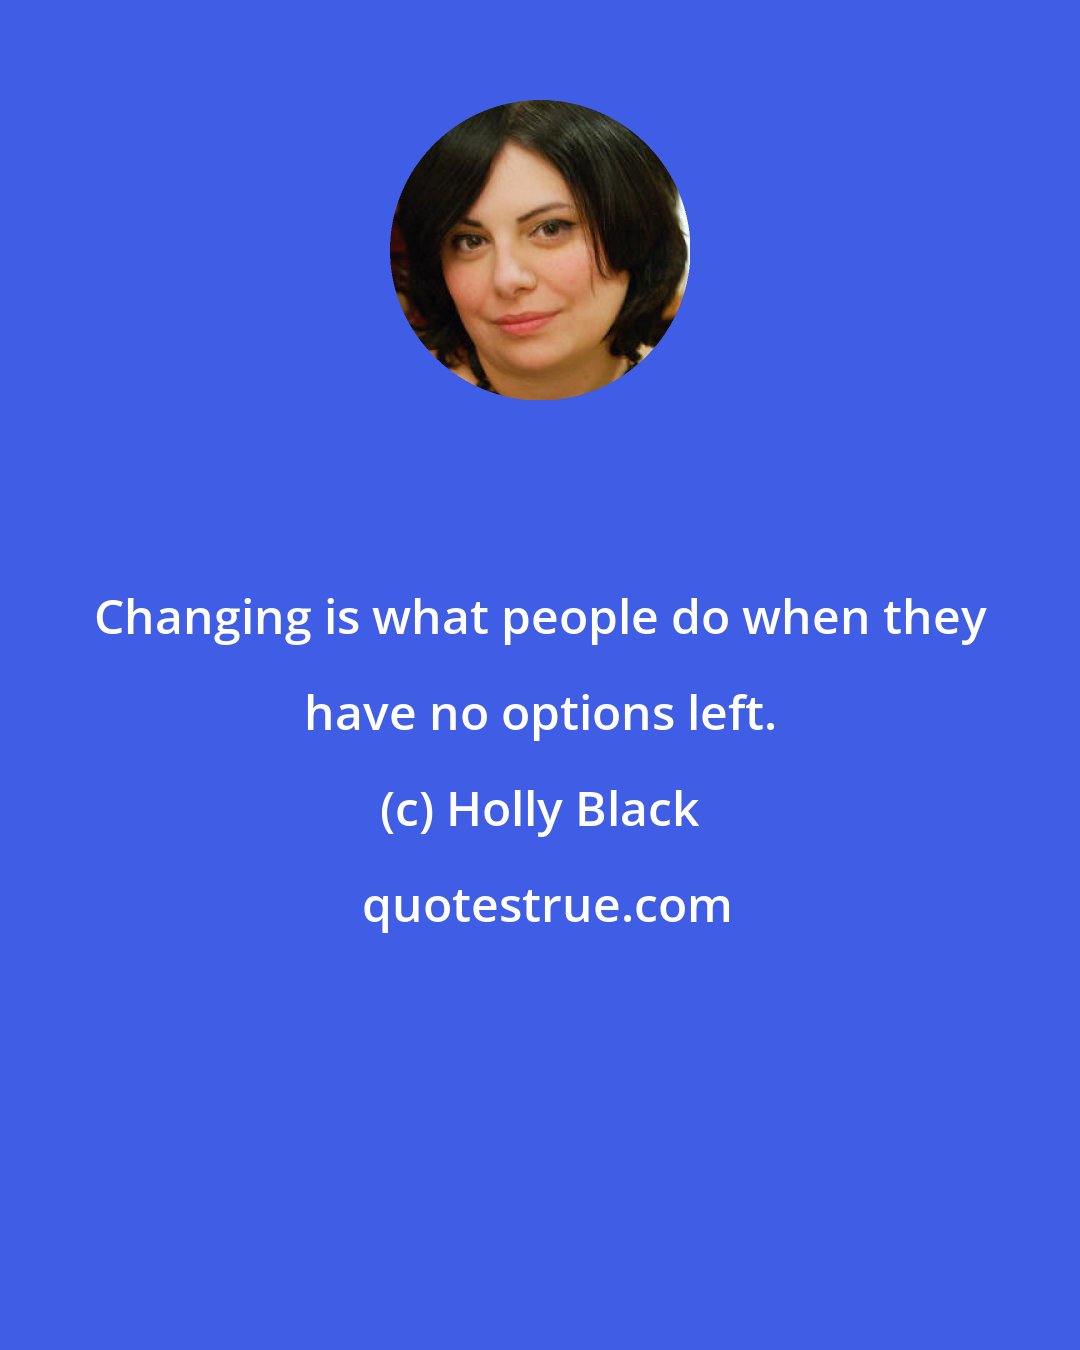 Holly Black: Changing is what people do when they have no options left.